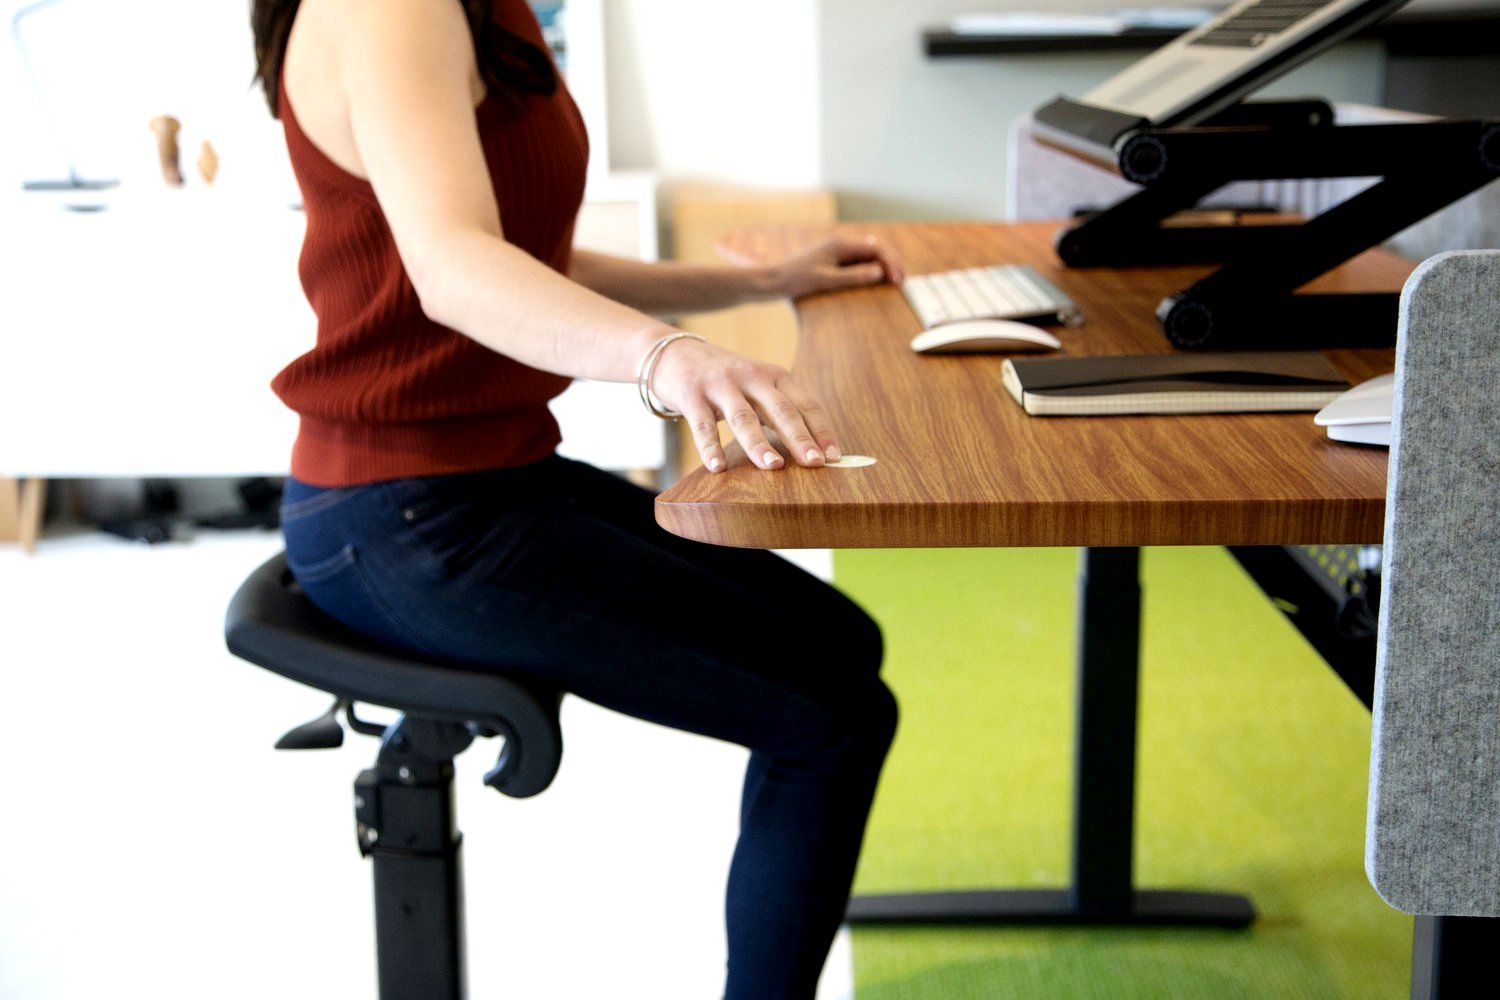 Standing Support Chairs Good for Posture